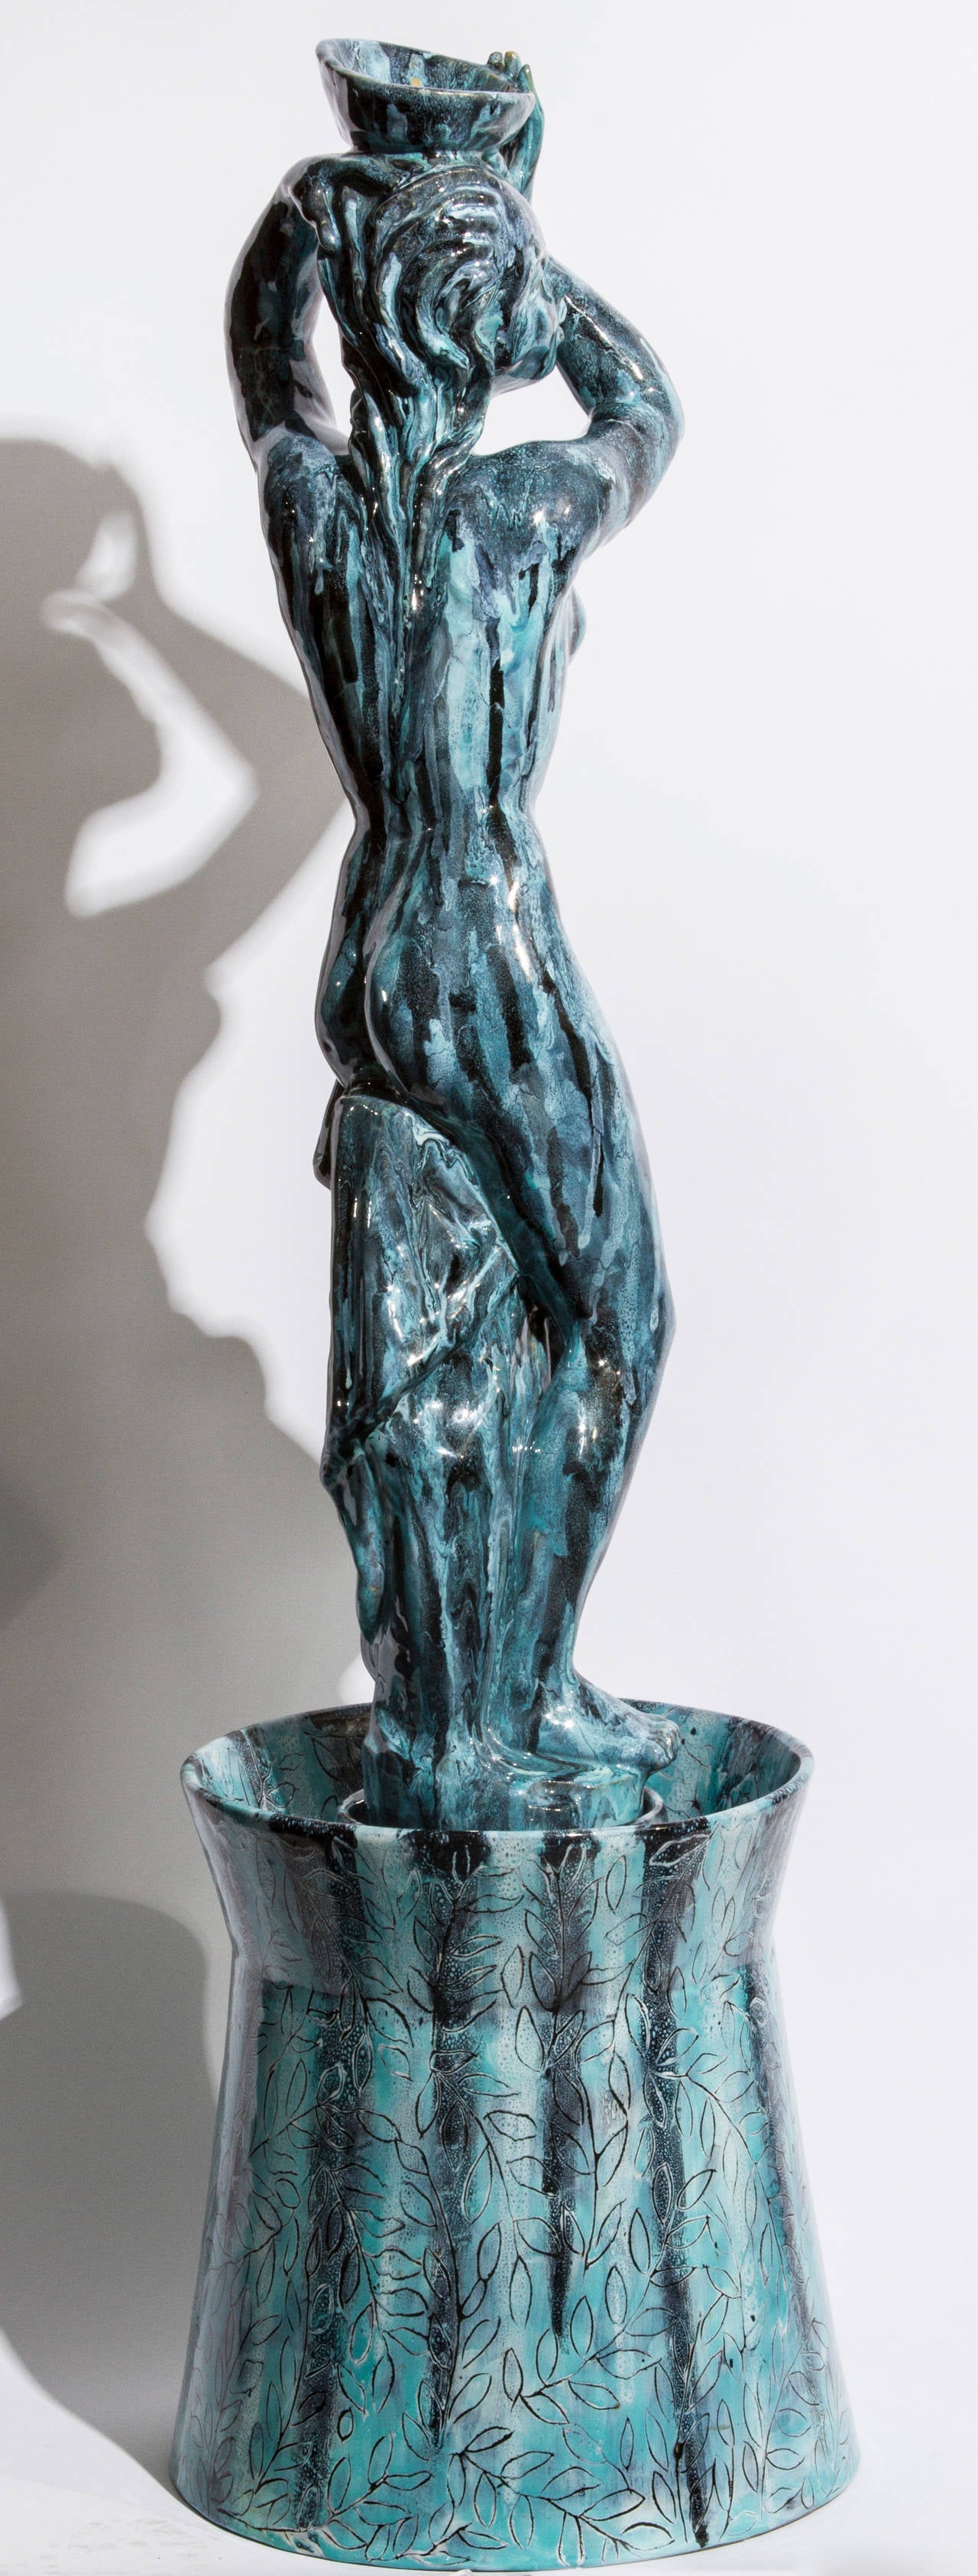 This piece features a maiden with a liquid blue glaze bathing in the water.